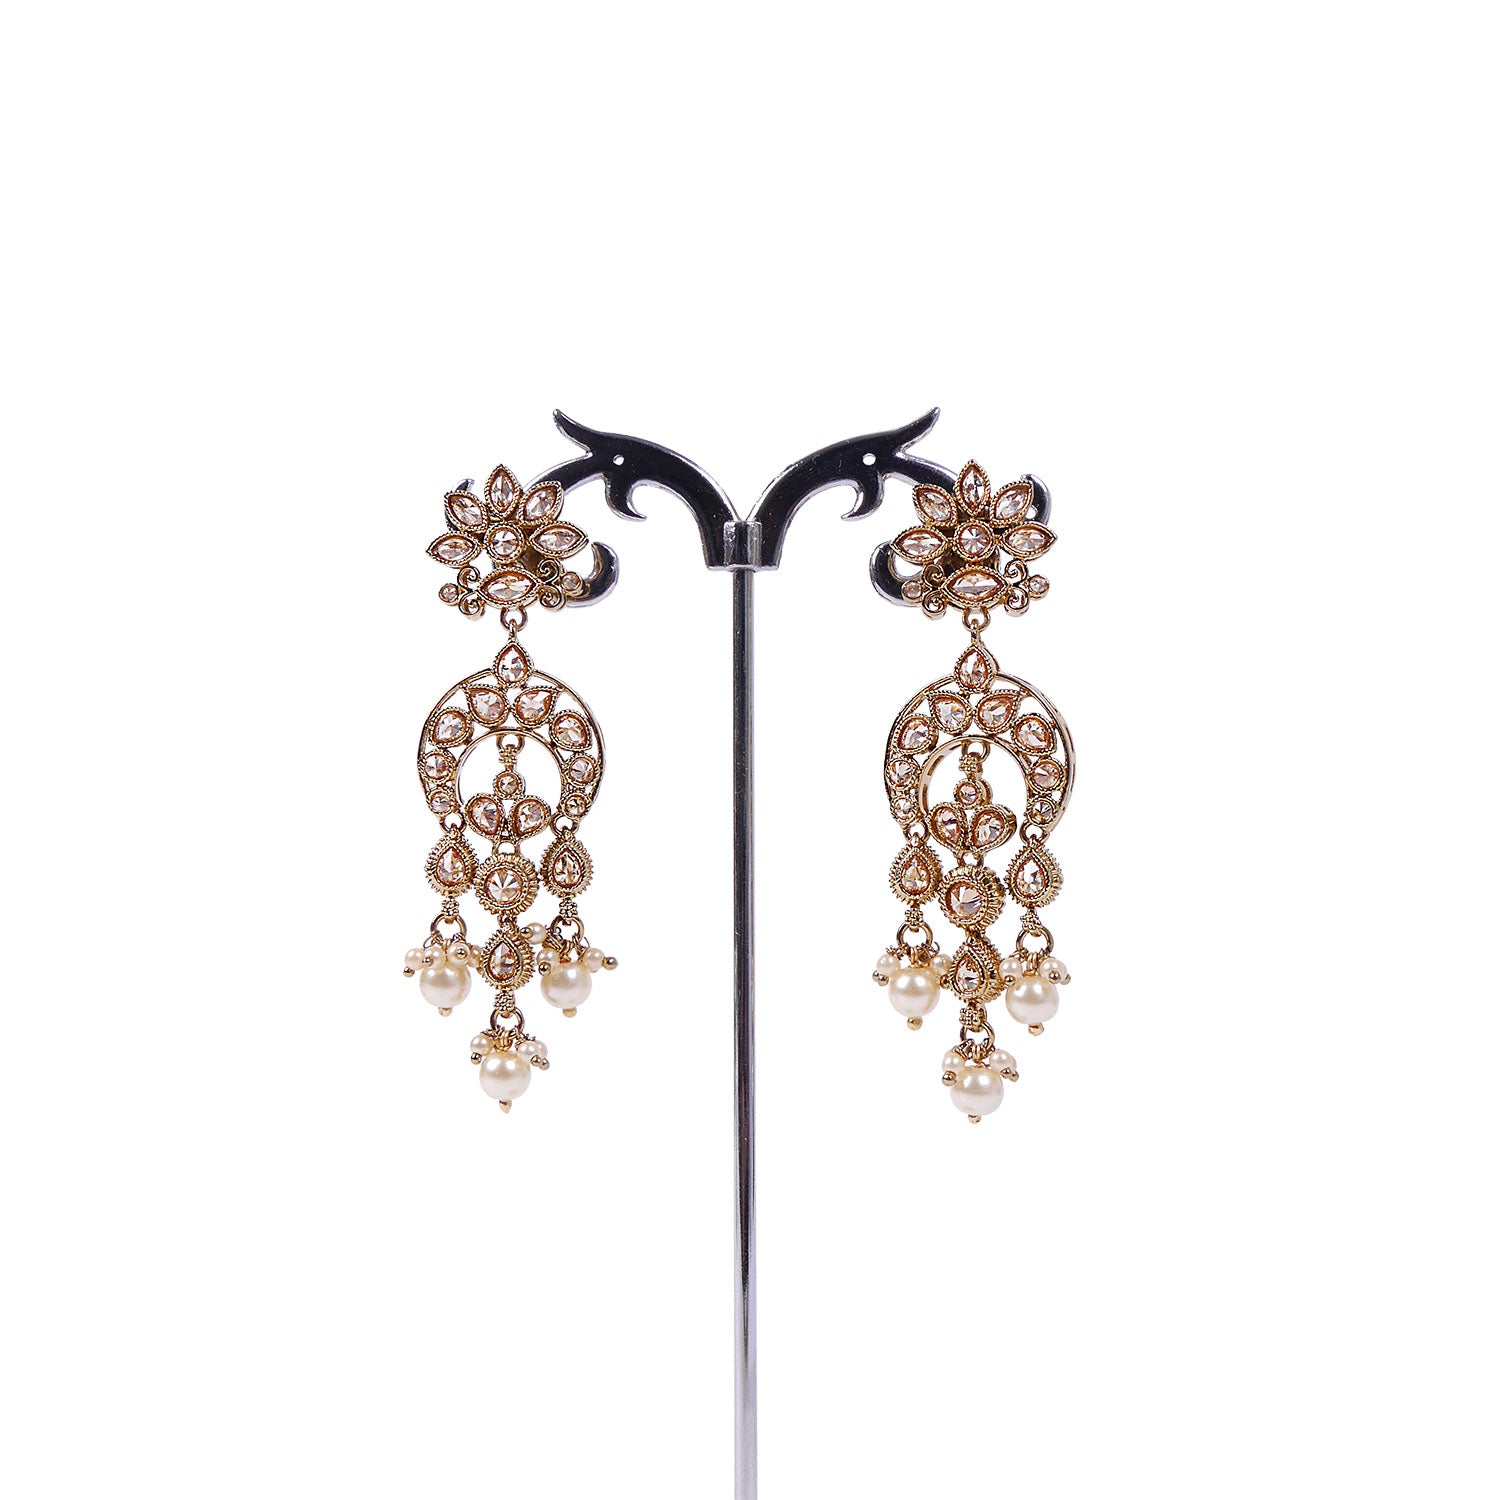 Ariyah Earrings in Pearl and Antique Gold